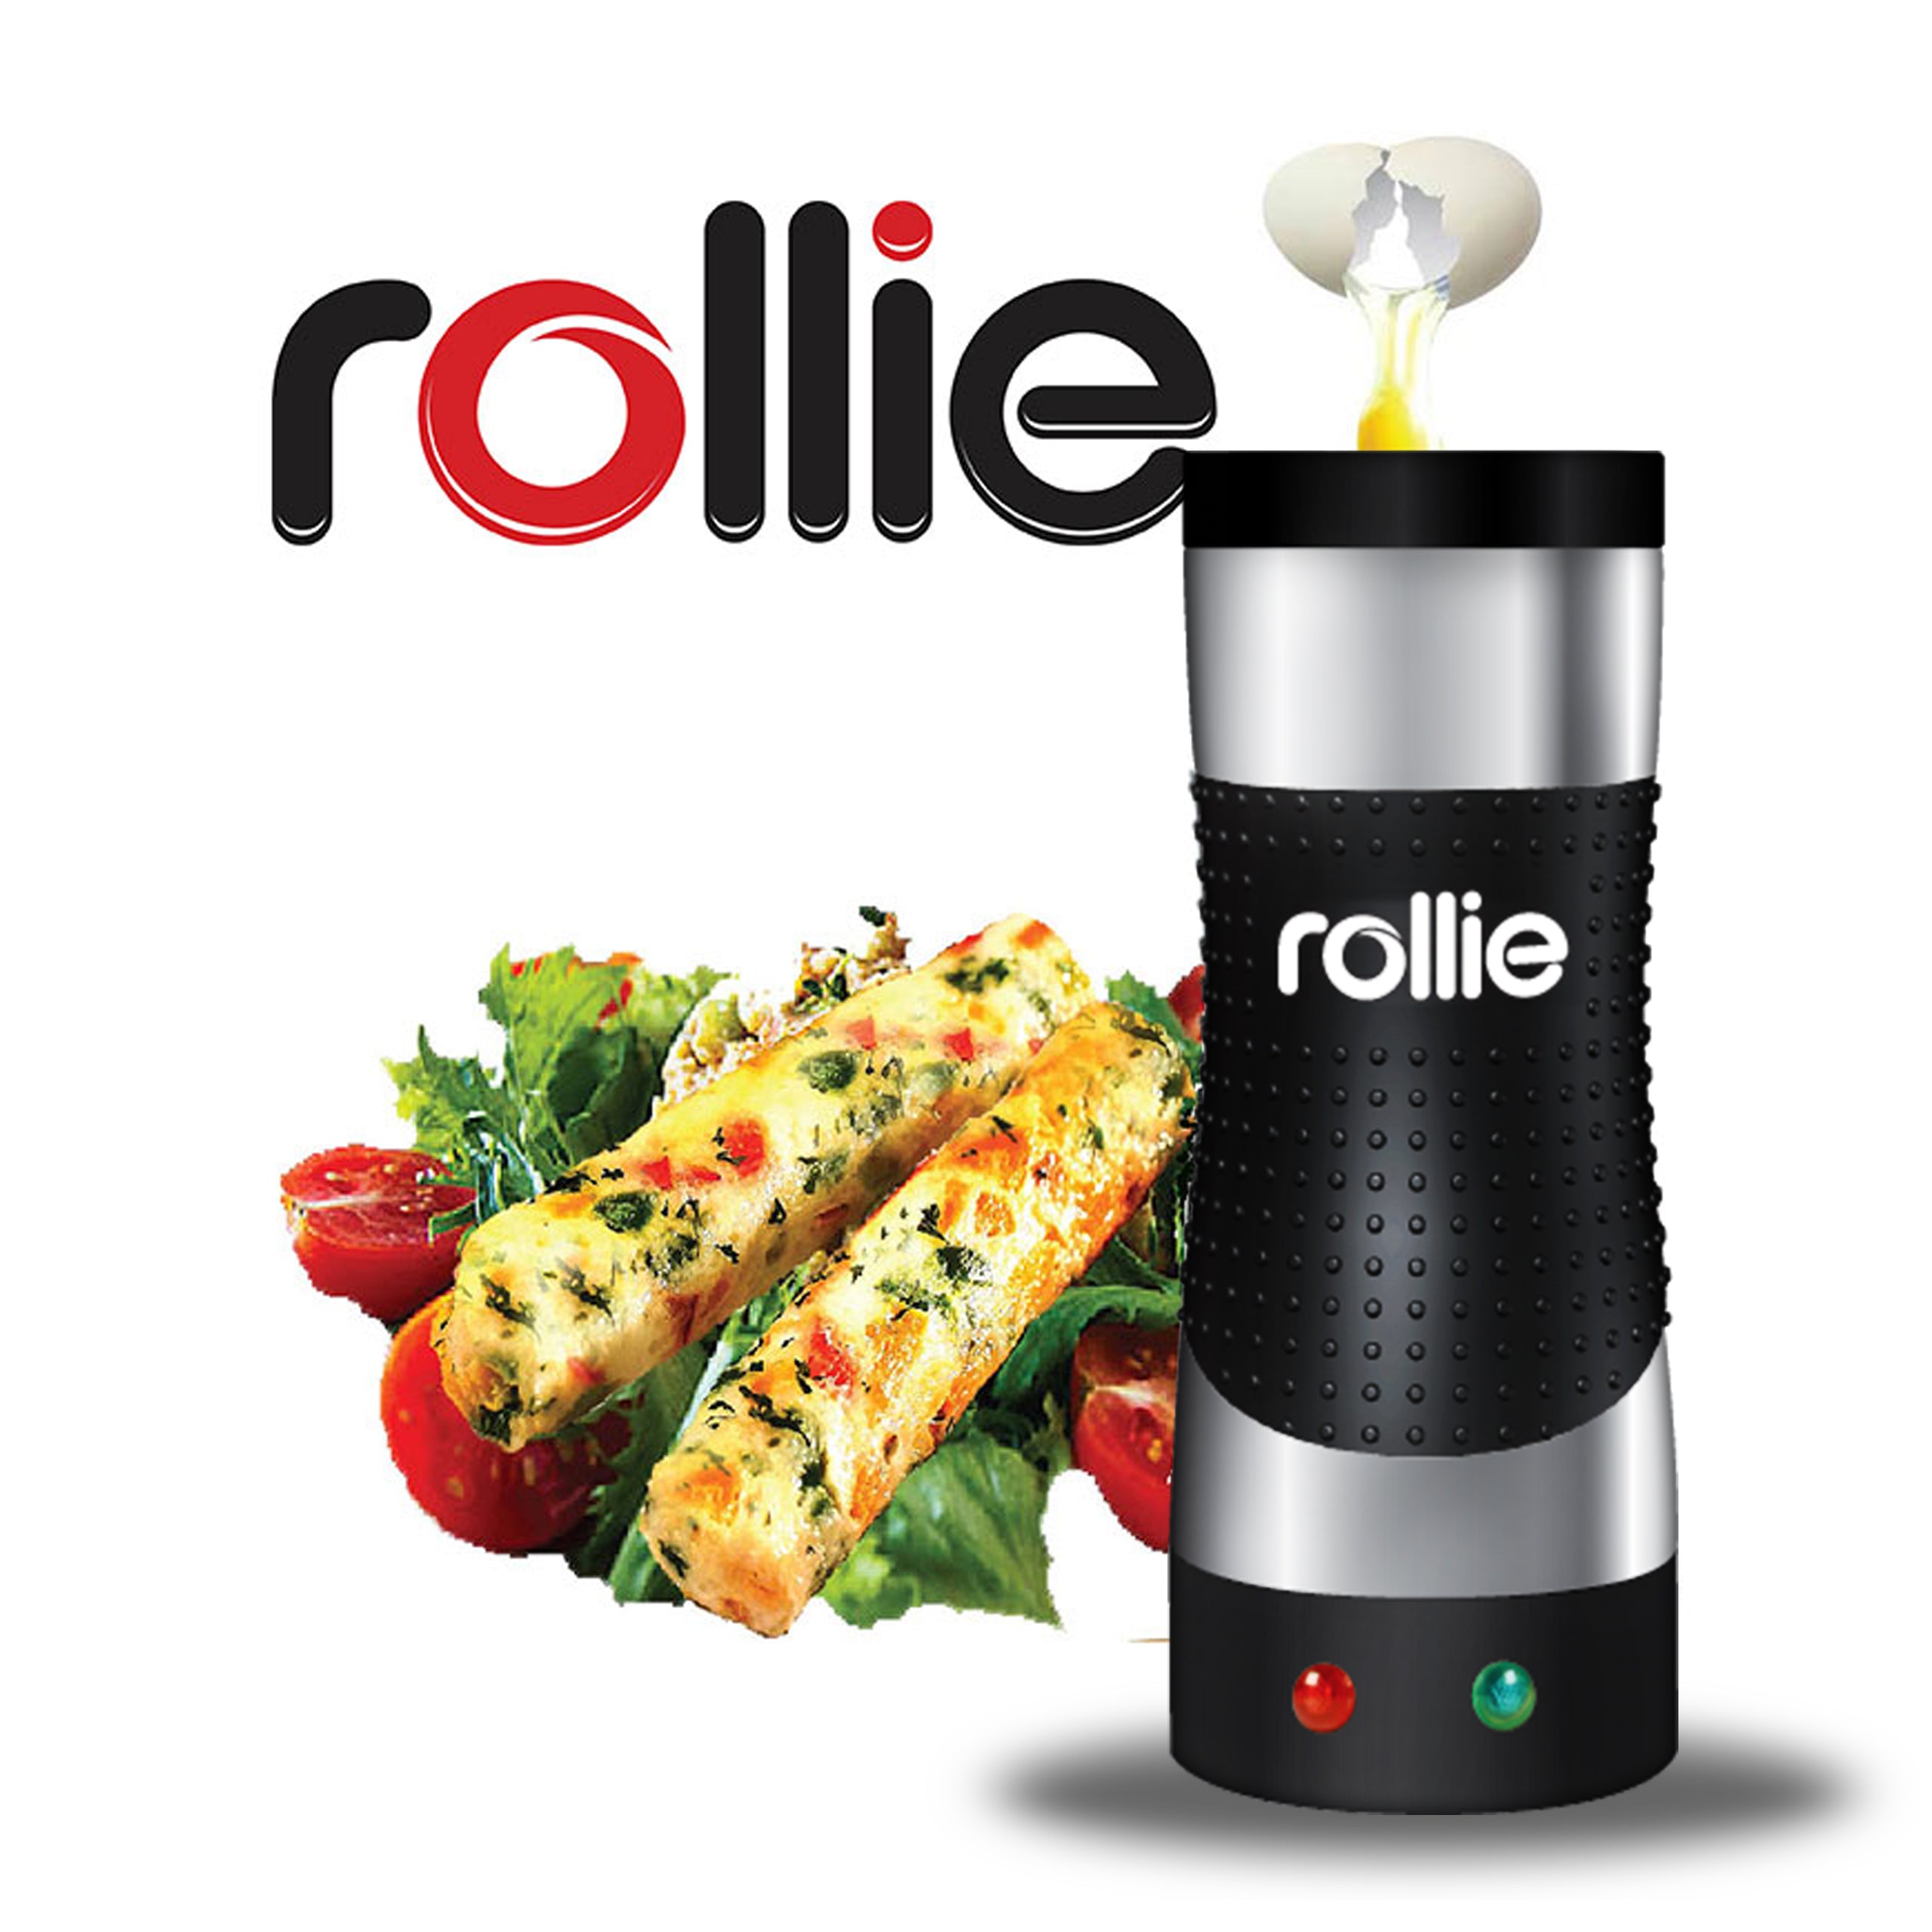 Rollie Eggmaster Hands-Free Automatic Electric Vertical Nonstick Easy Quick Egg Cooker